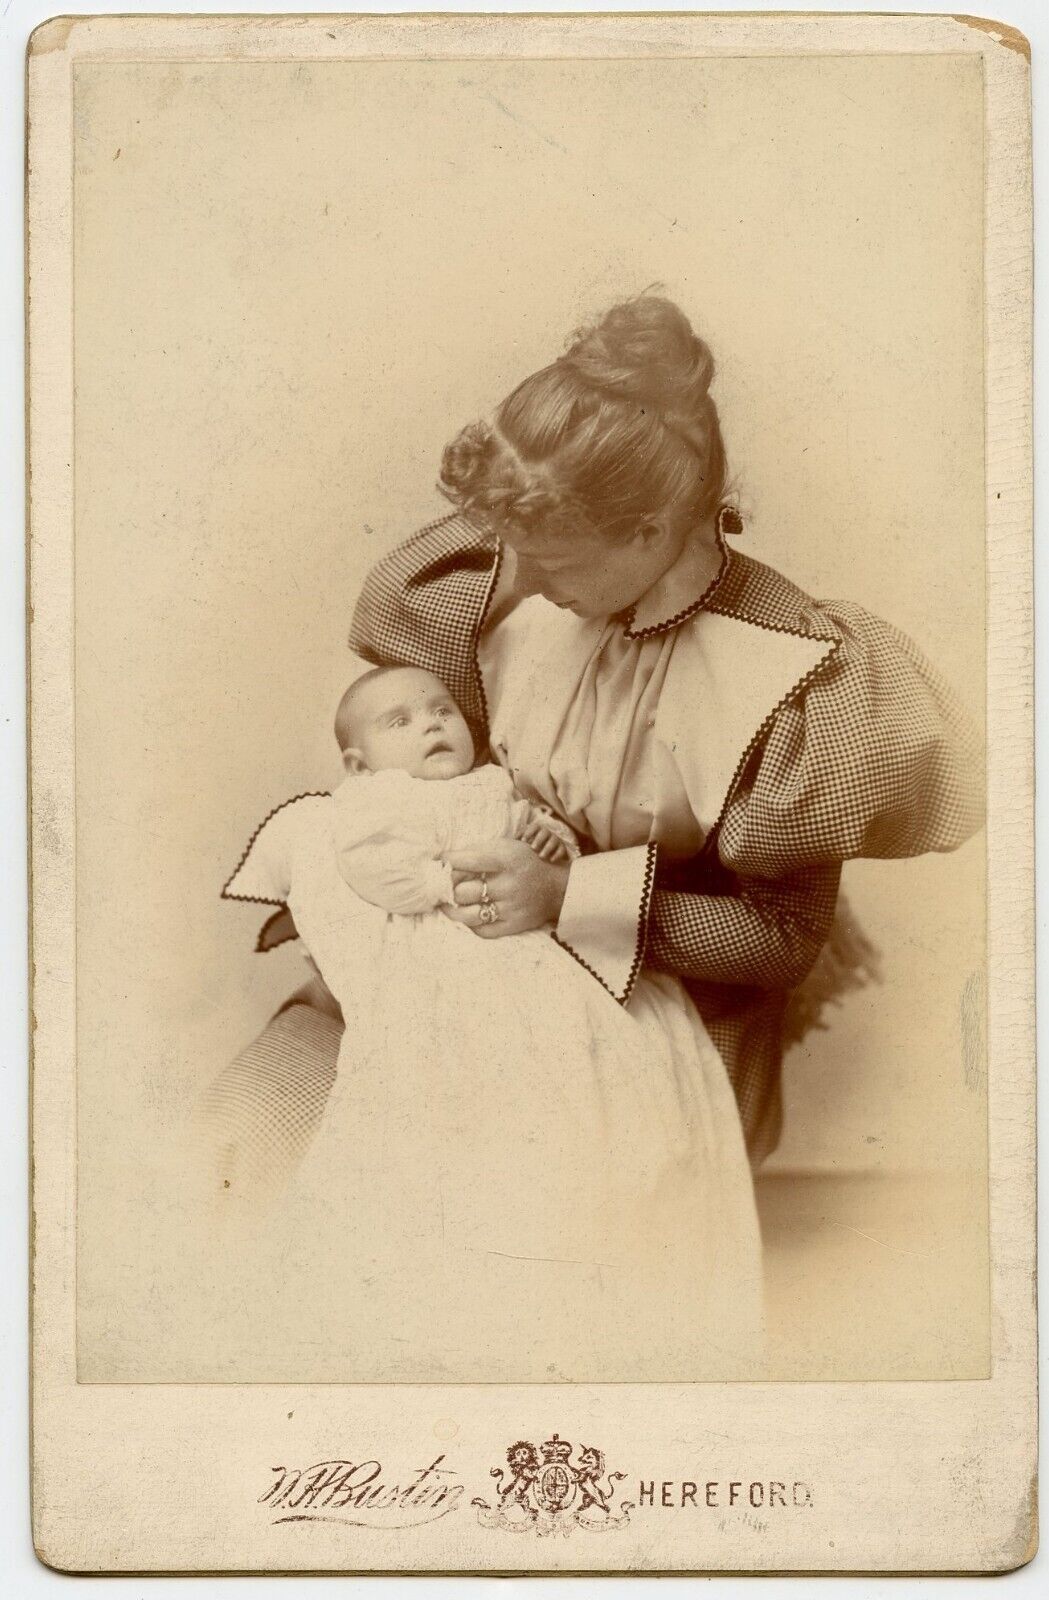 Young Woman and Baby , Vintage Children Photo by Bustin , Hereford UK